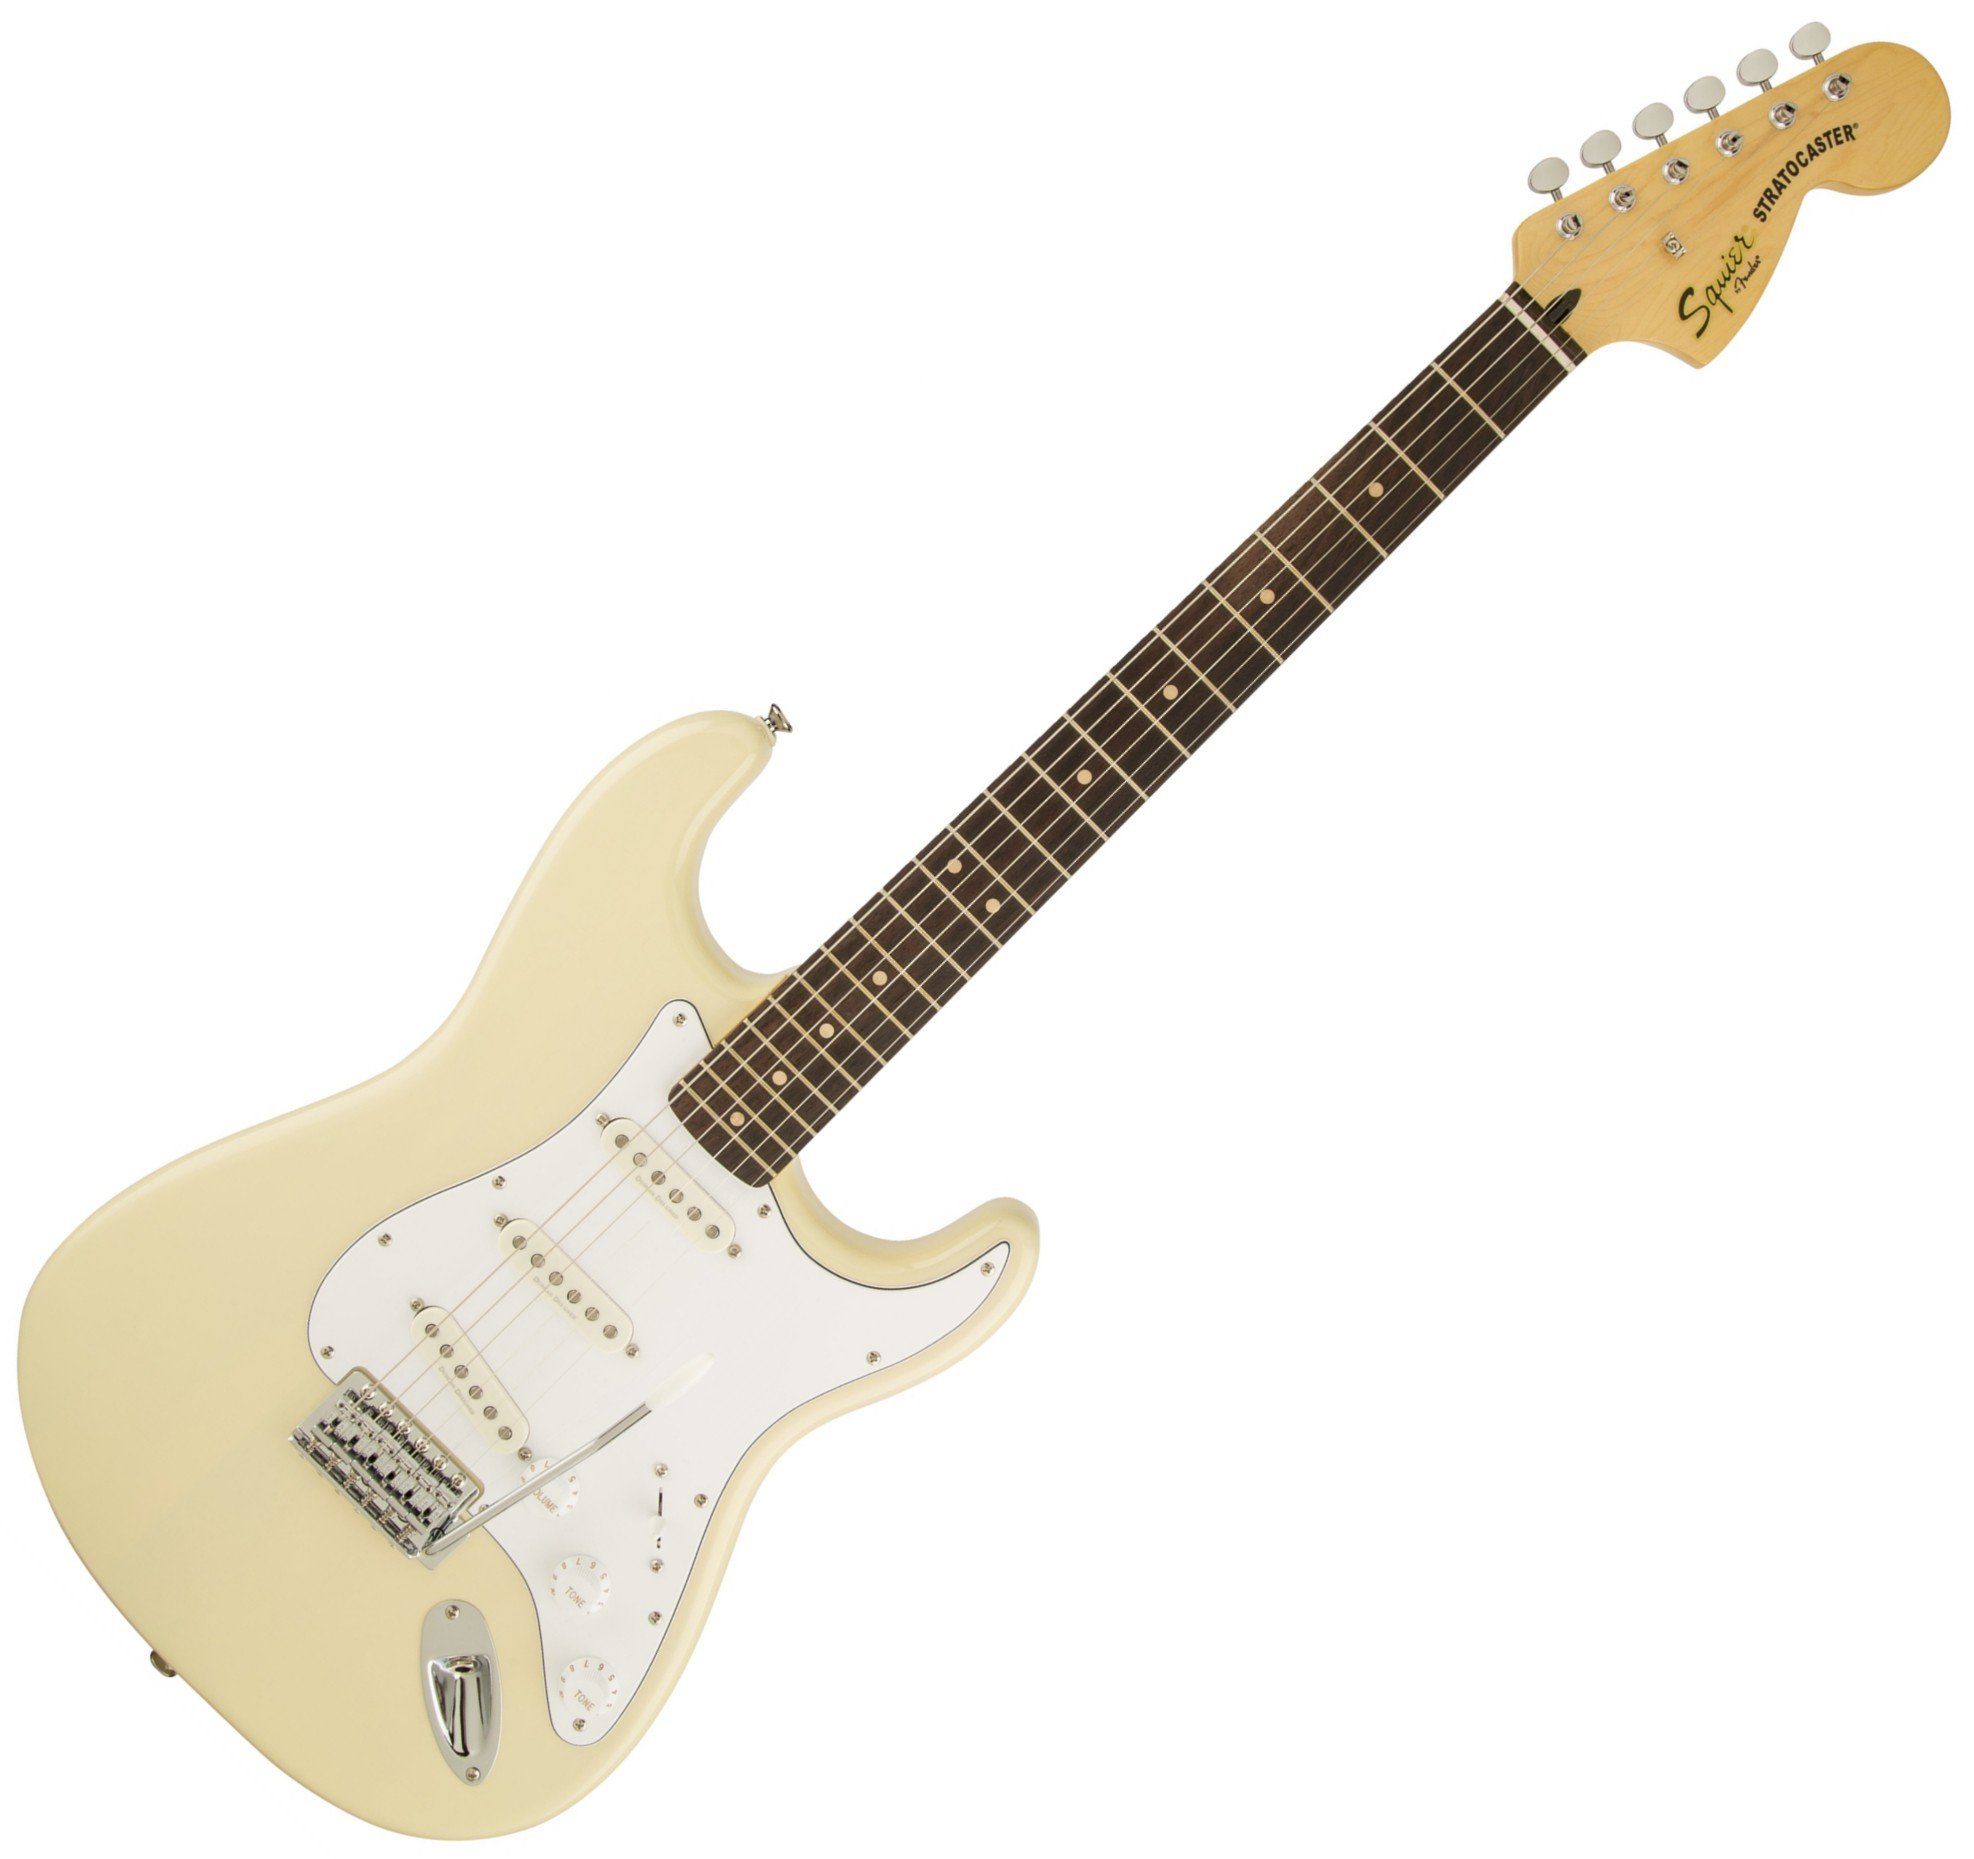 White stratocaster. Электрогитарас fenser Square. Электрогитара Fender Squier. Электрогитара Squier Affinity Telecaster. Cort g110 CGN электрогитара.